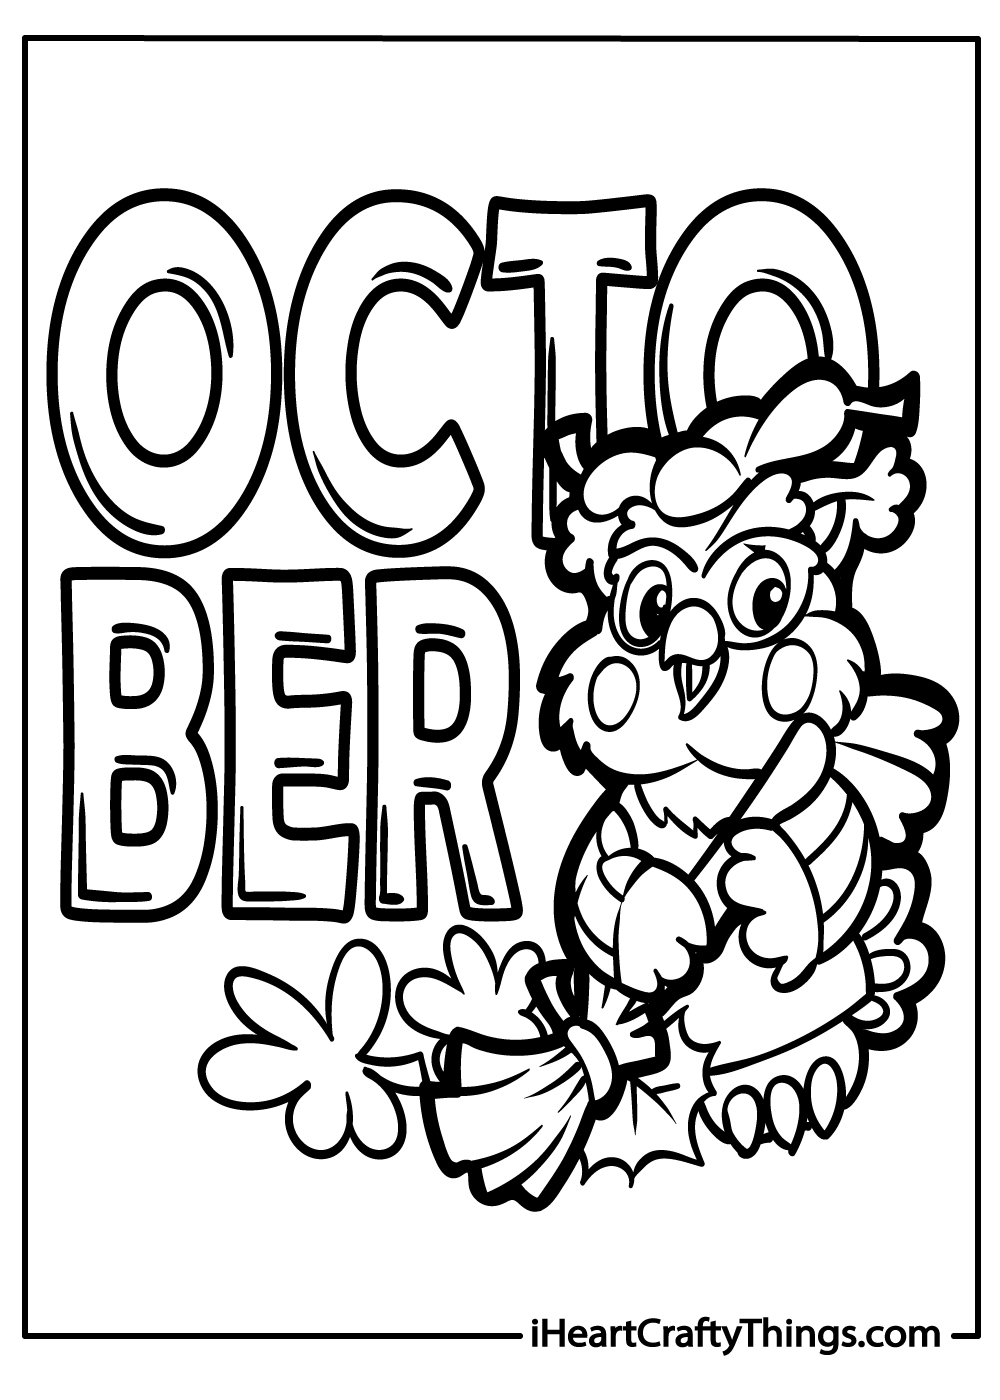 cute october coloring sheets for kids free pdf download